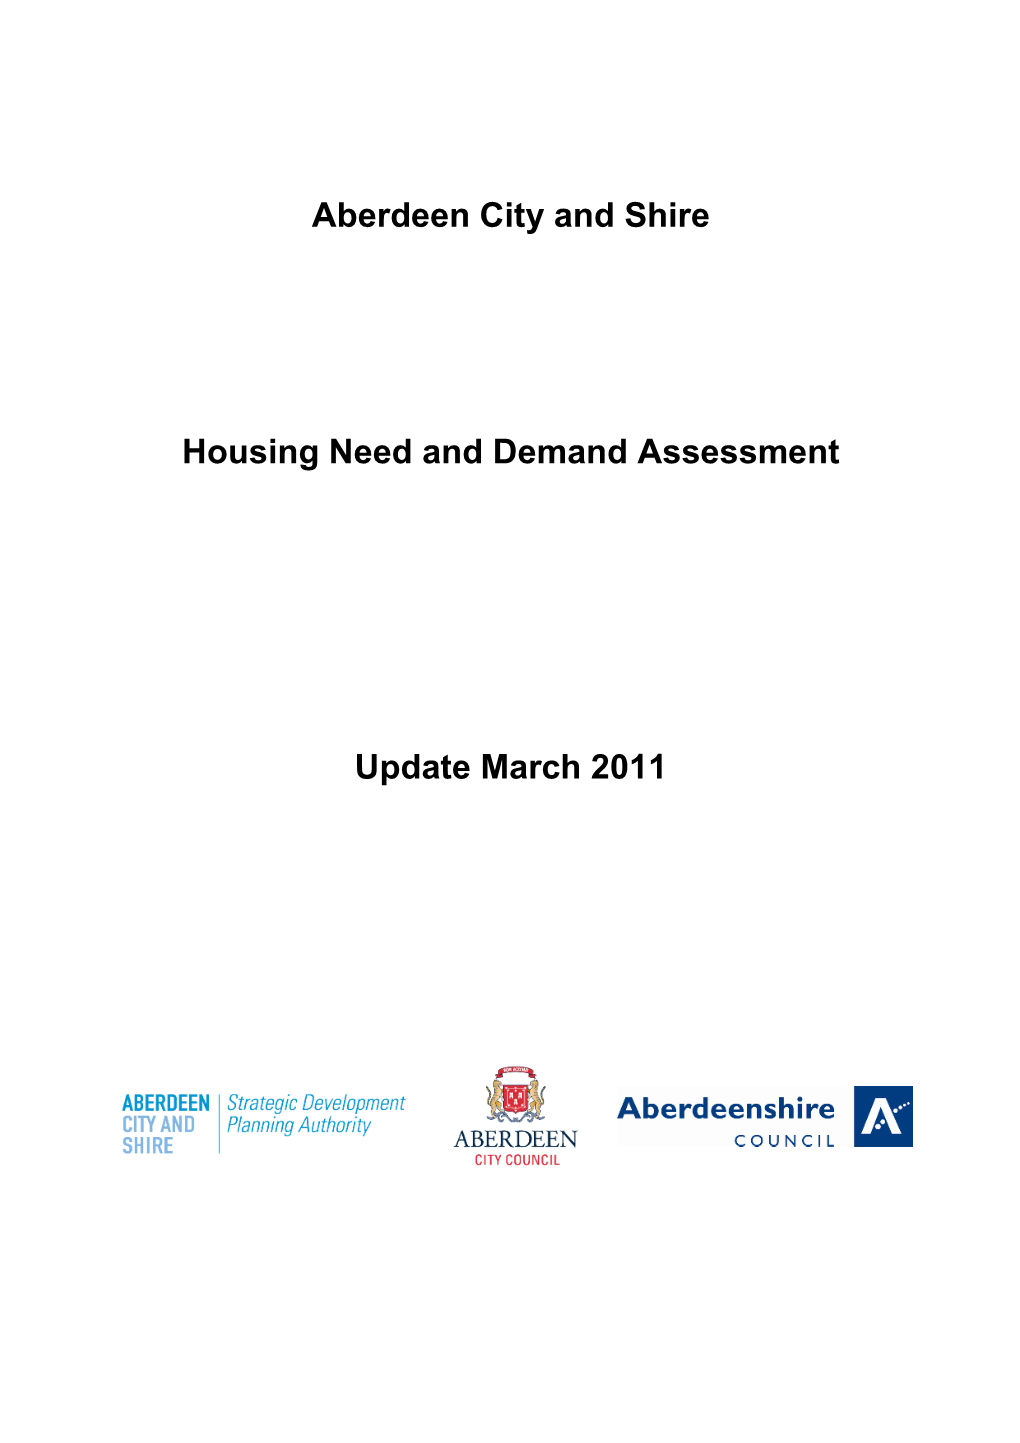 Housing Need and Demands Assessment 2011